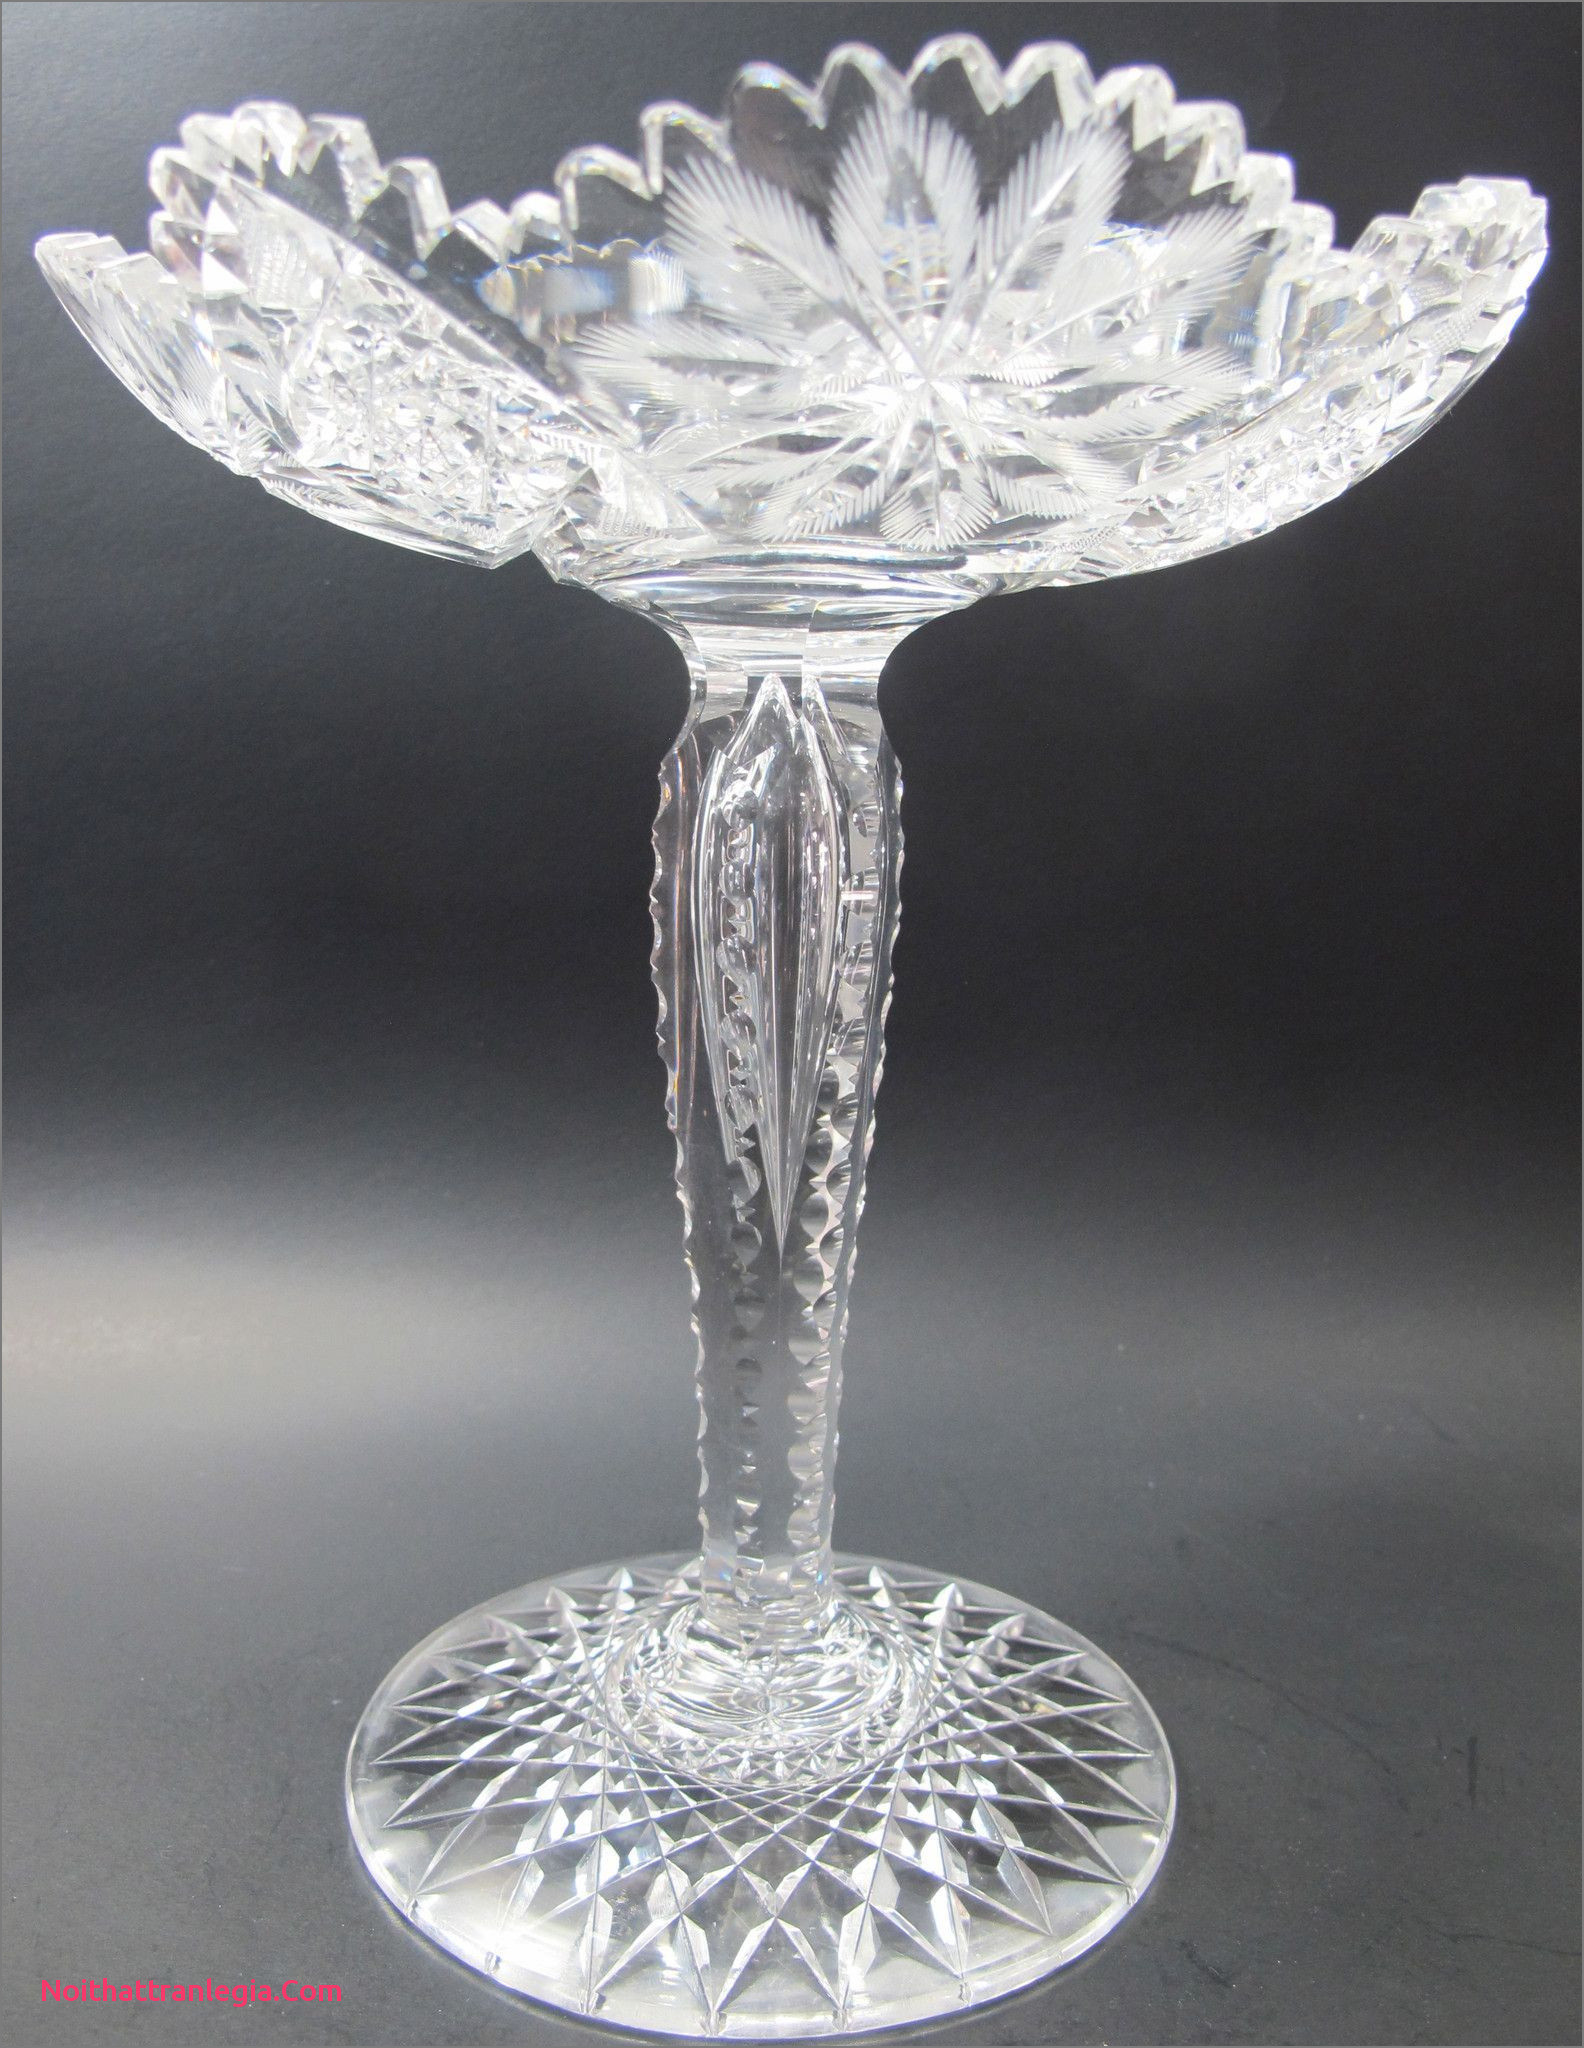 28 Spectacular Lead Crystal Cut Glass Vase 2024 free download lead crystal cut glass vase of 20 cut glass antique vase noithattranlegia vases design in fering this abp antique cut glass pote from the american brilliant period 1886 1916 9 5